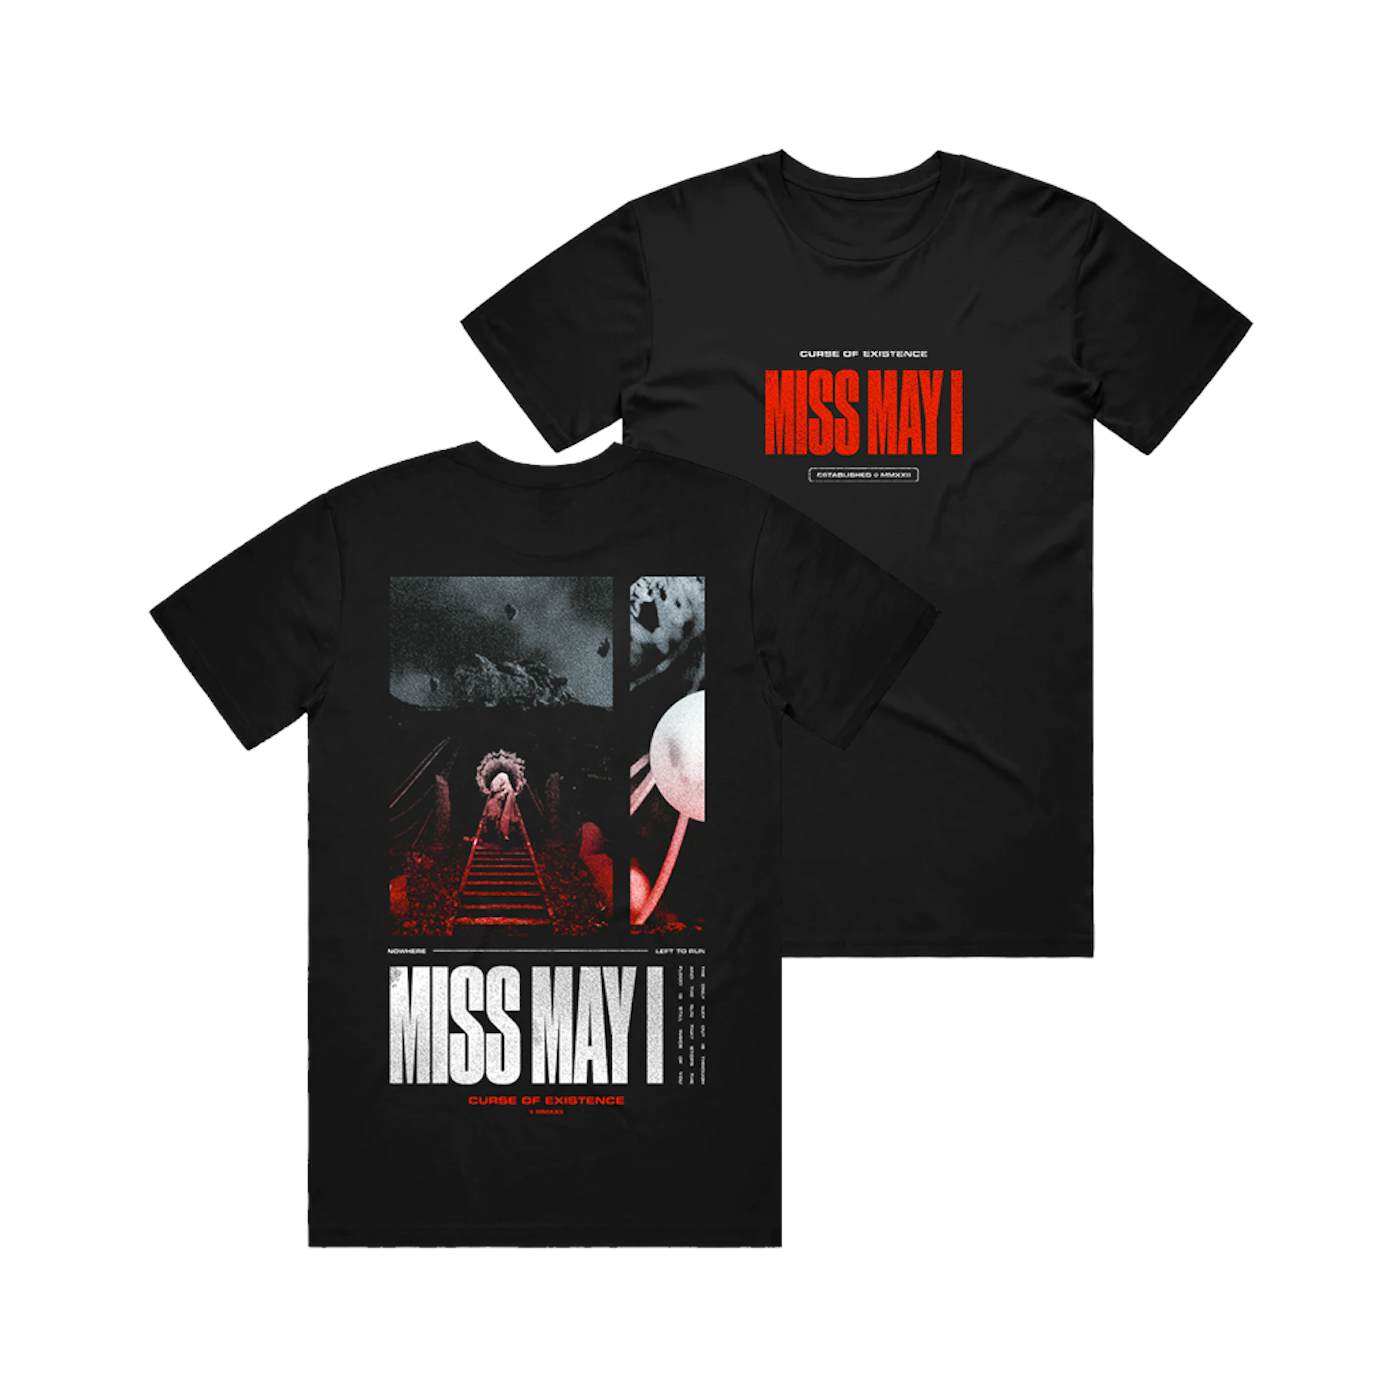 Miss May I - Curse of Existence Tee